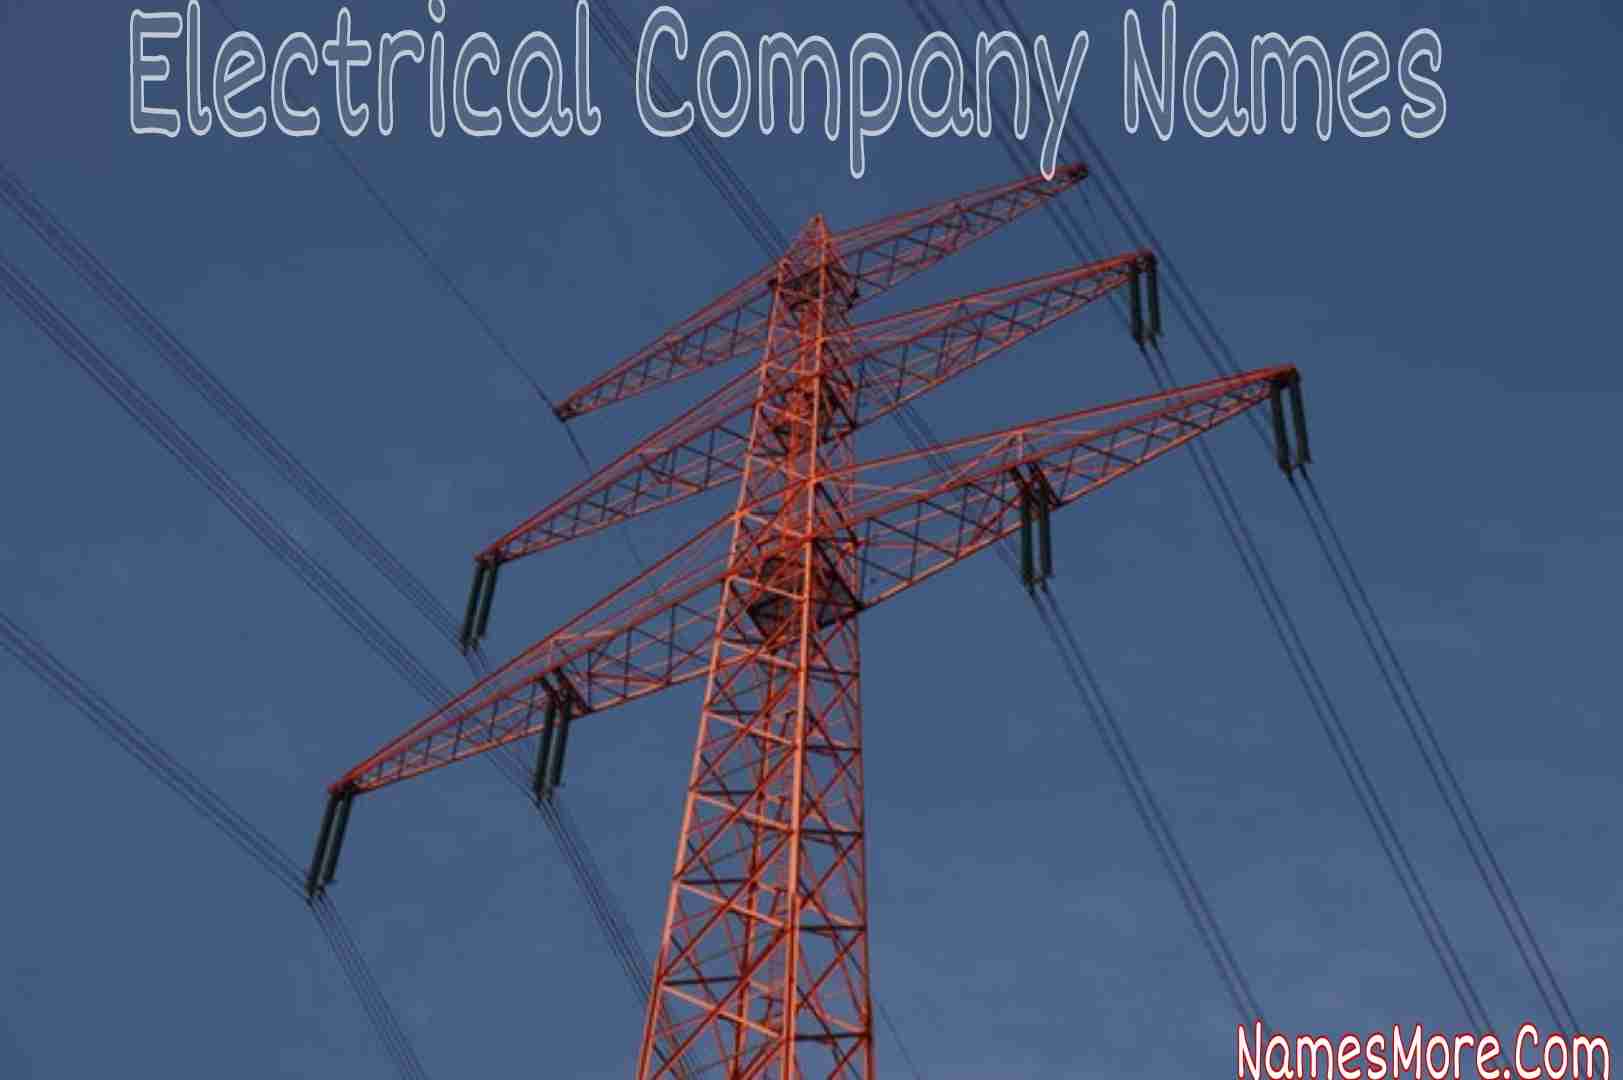 Featured Image for 900+ Electrical Company Names [Best Guide]